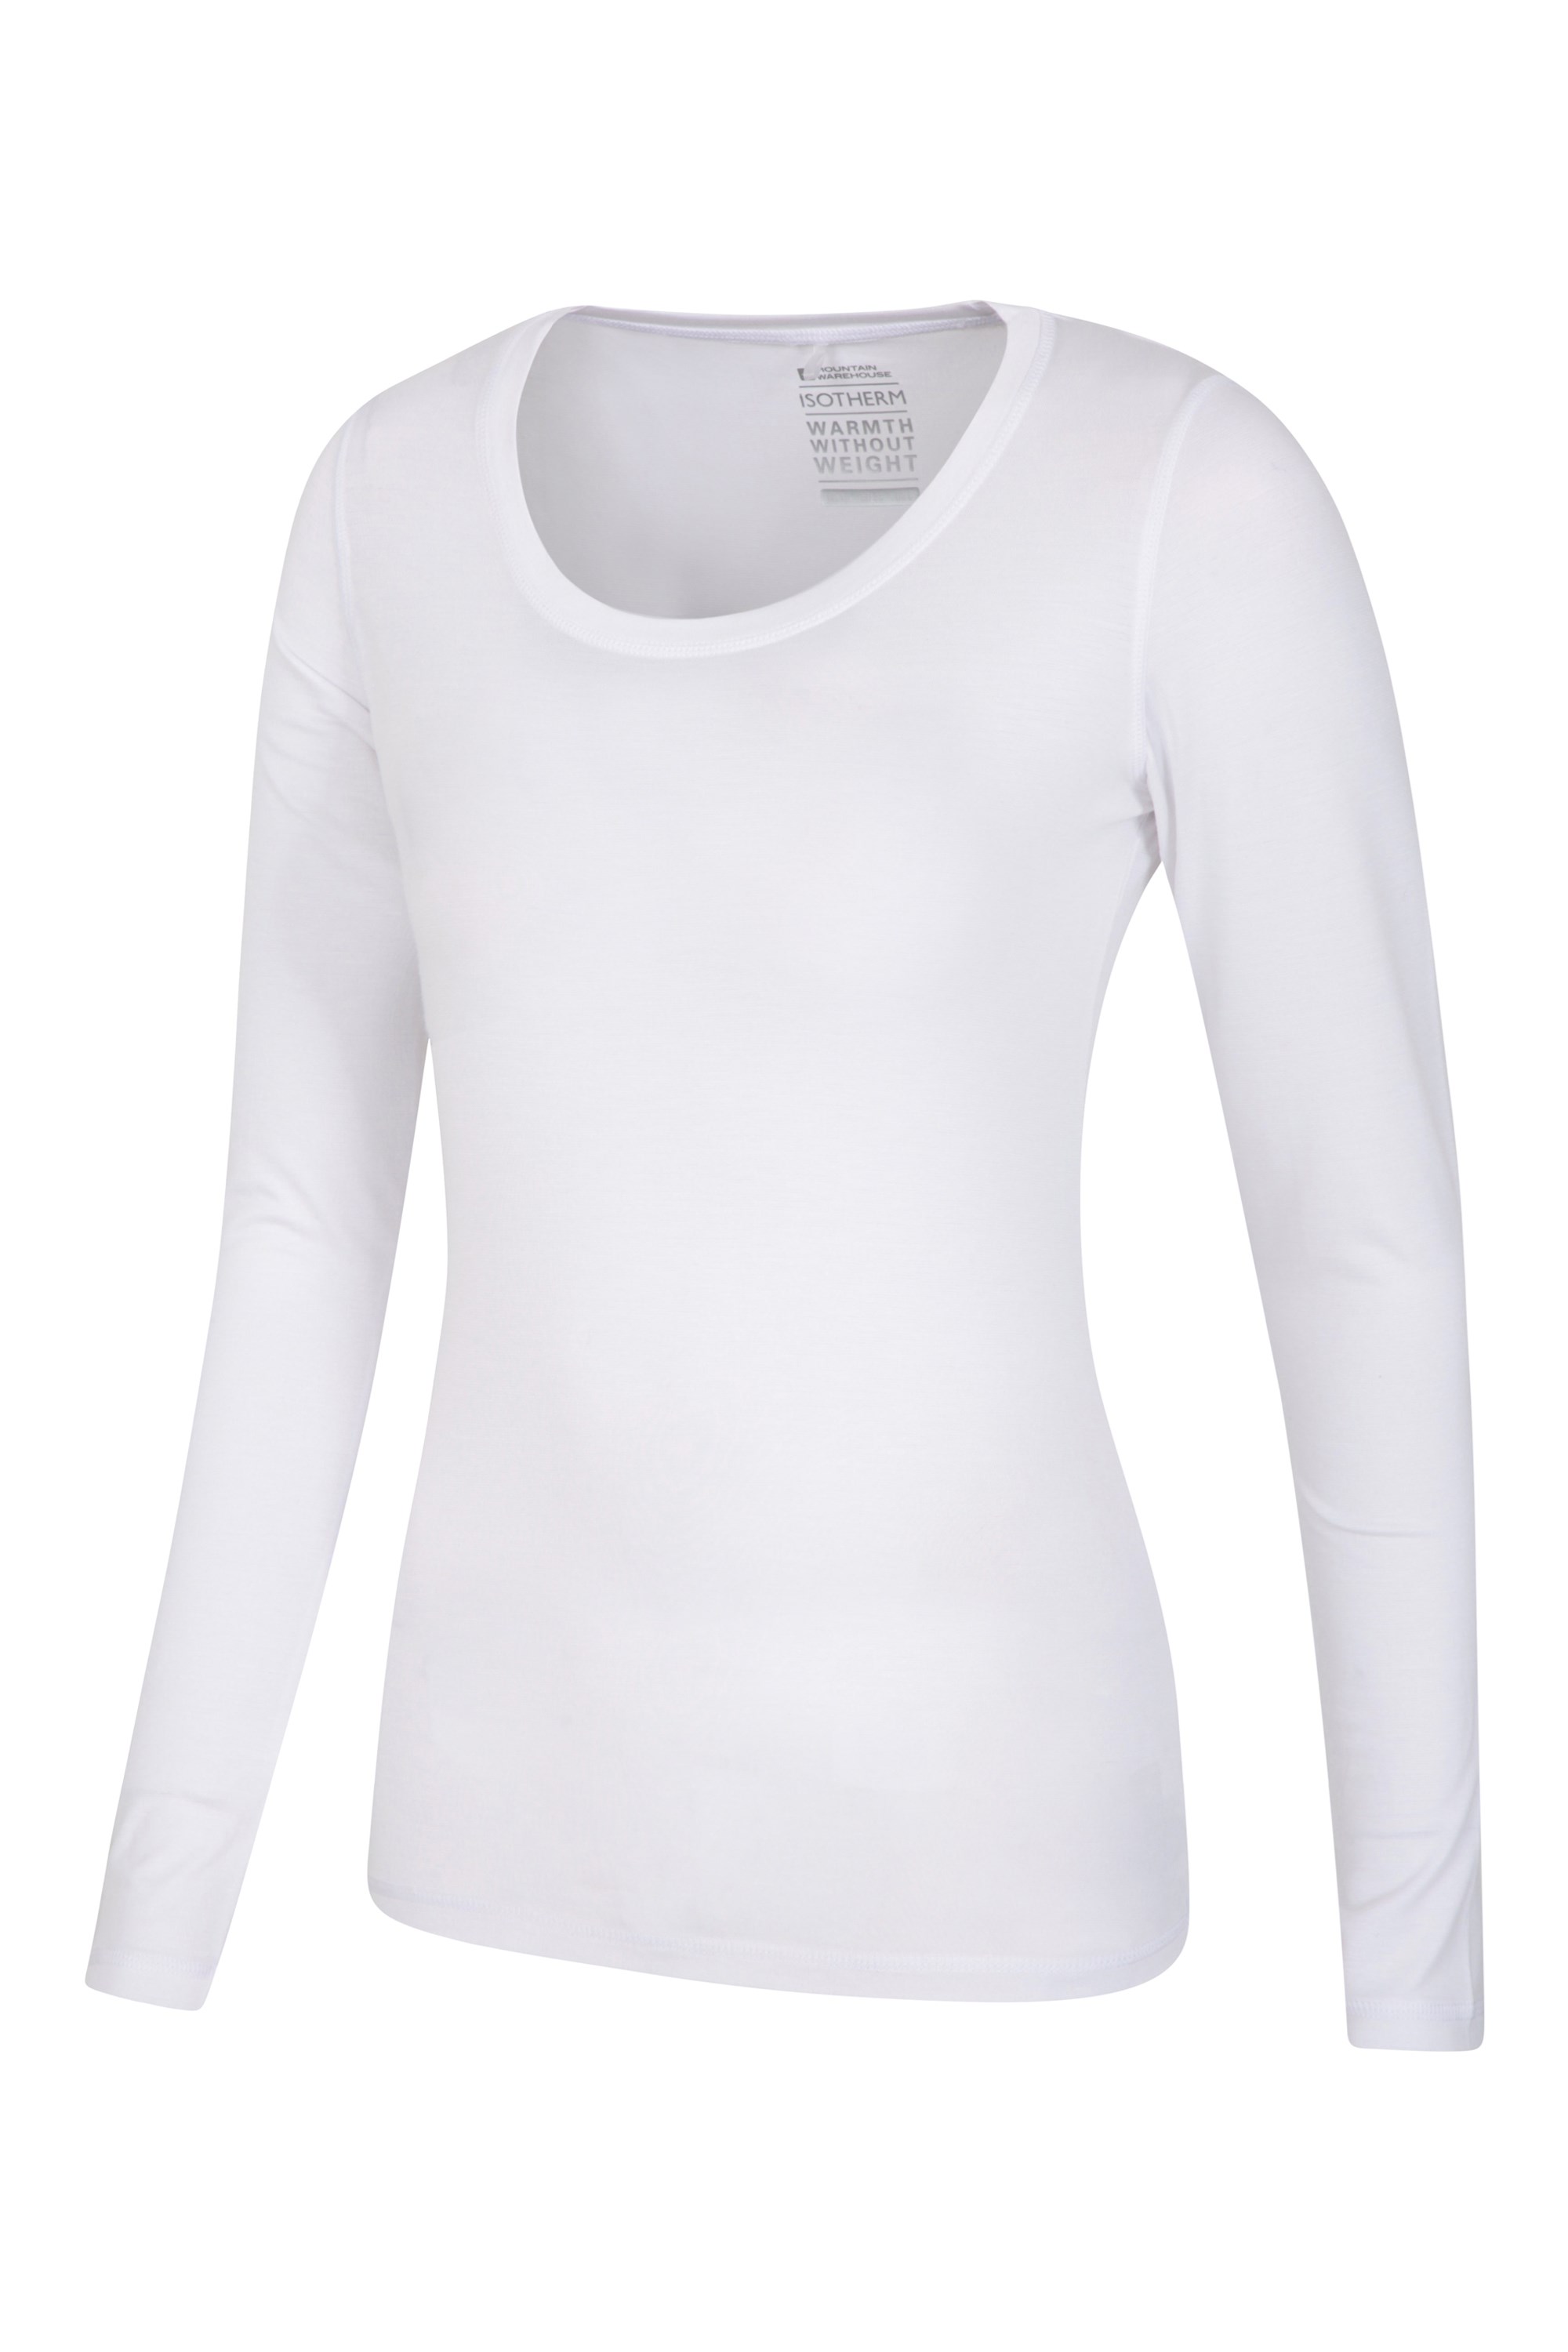 Mountain Warehouse Keep The Heat Isotherm Womens Round Neck Top